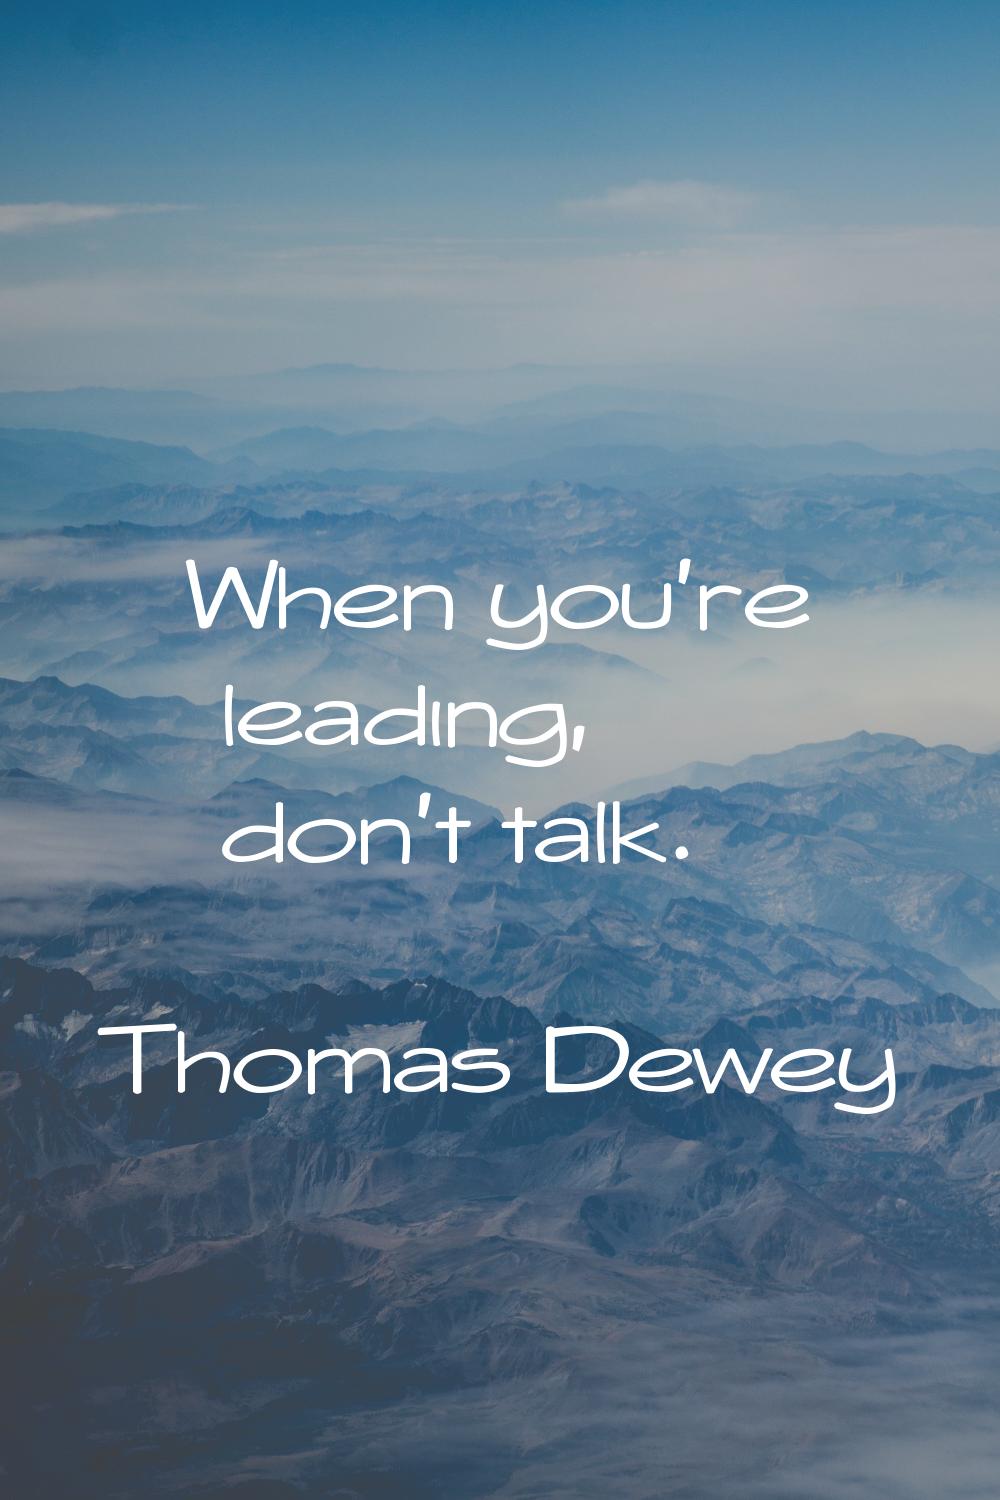 When you're leading, don't talk.